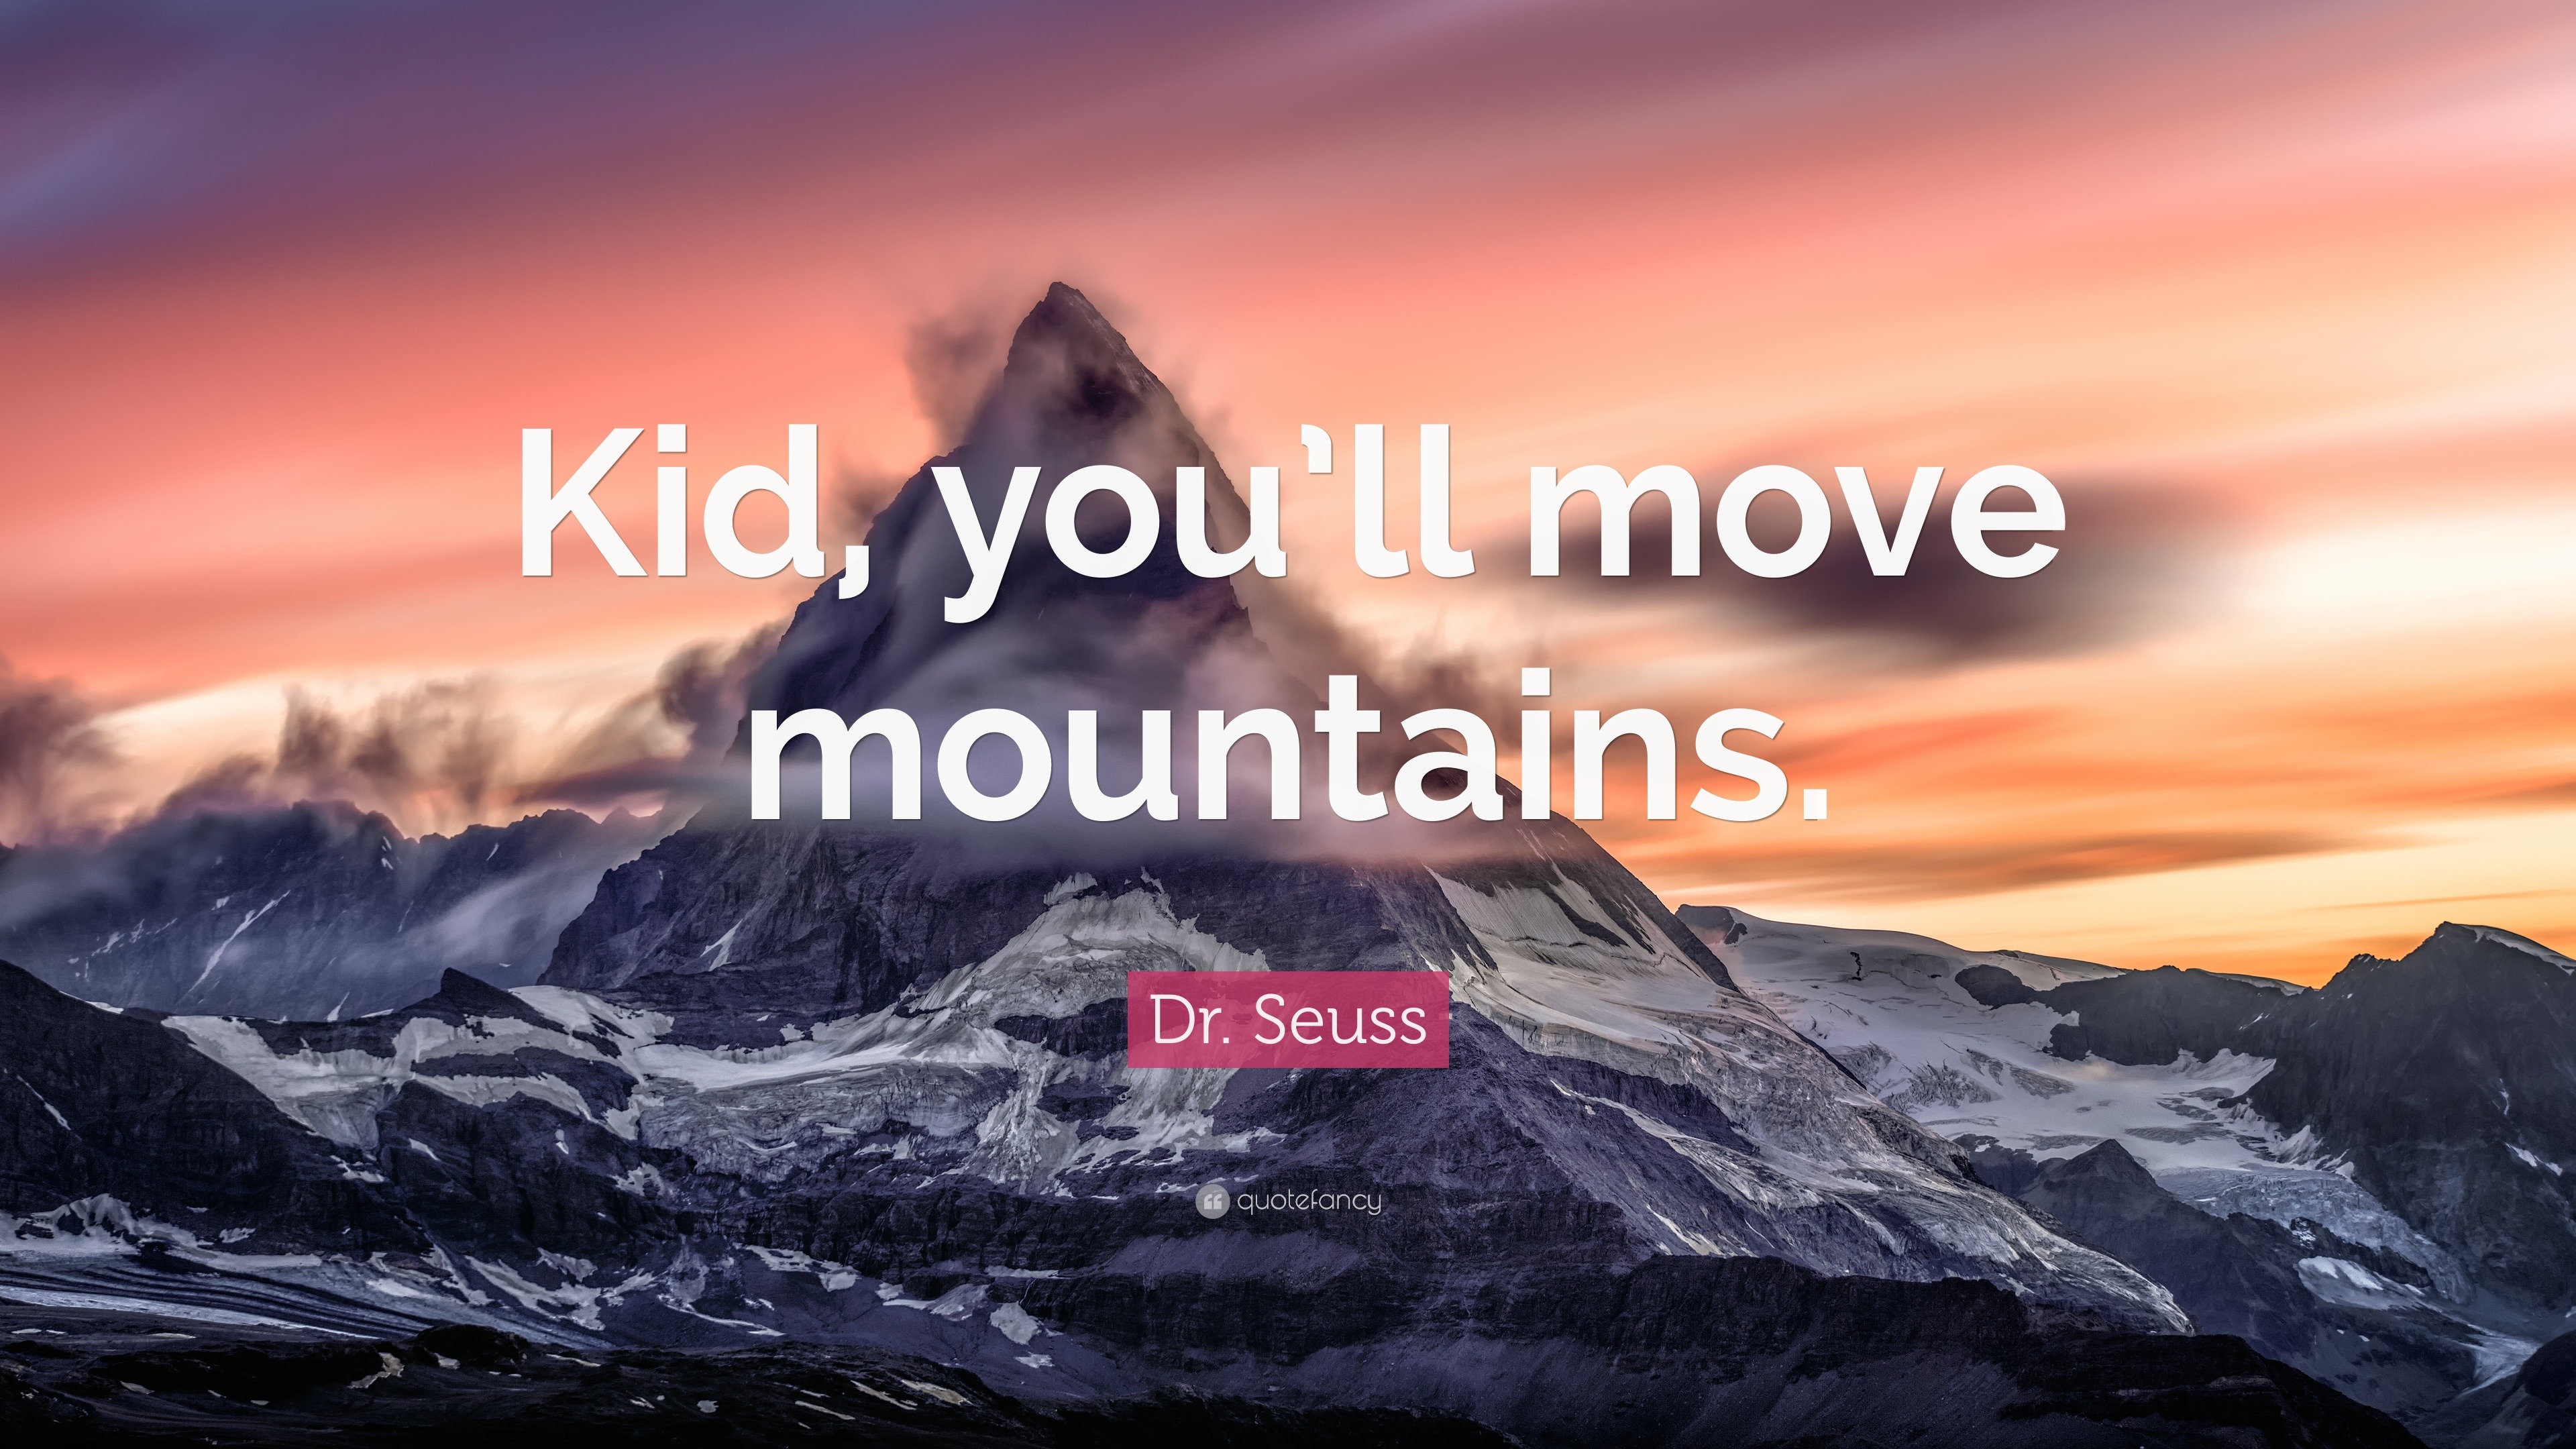 1715159 Dr Seuss Quote Kid you ll move mountains